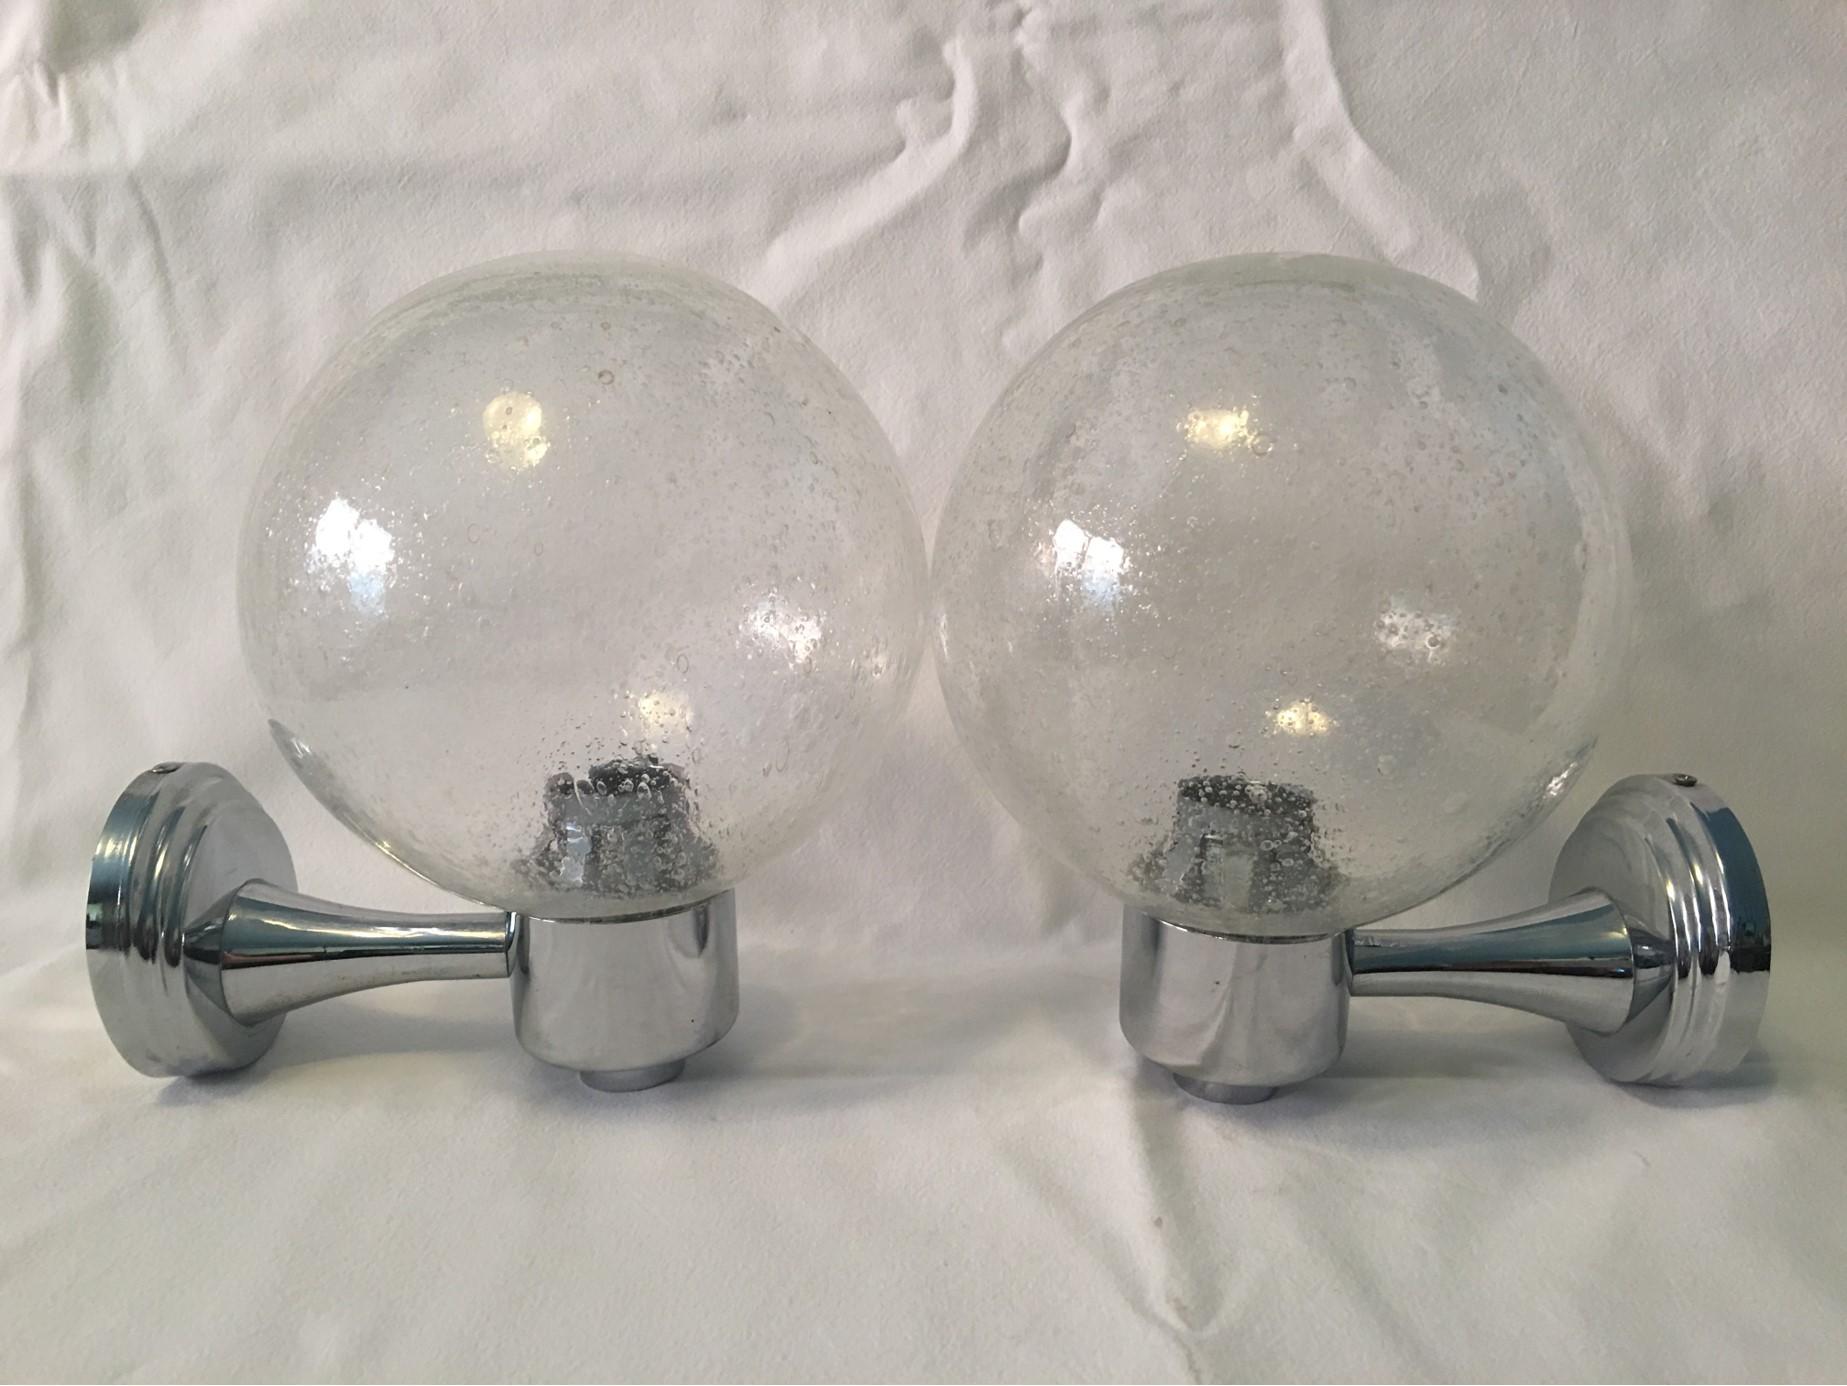 A pair of pretty Chrome and Air Bubble Glass Ball Sconces from the 1970s. When lit they create a lovely glass reflection through the Bubble Glass scheme. E#ach one requires one European E14 Candelabra Bulb up to 40 watts. The wall fixture